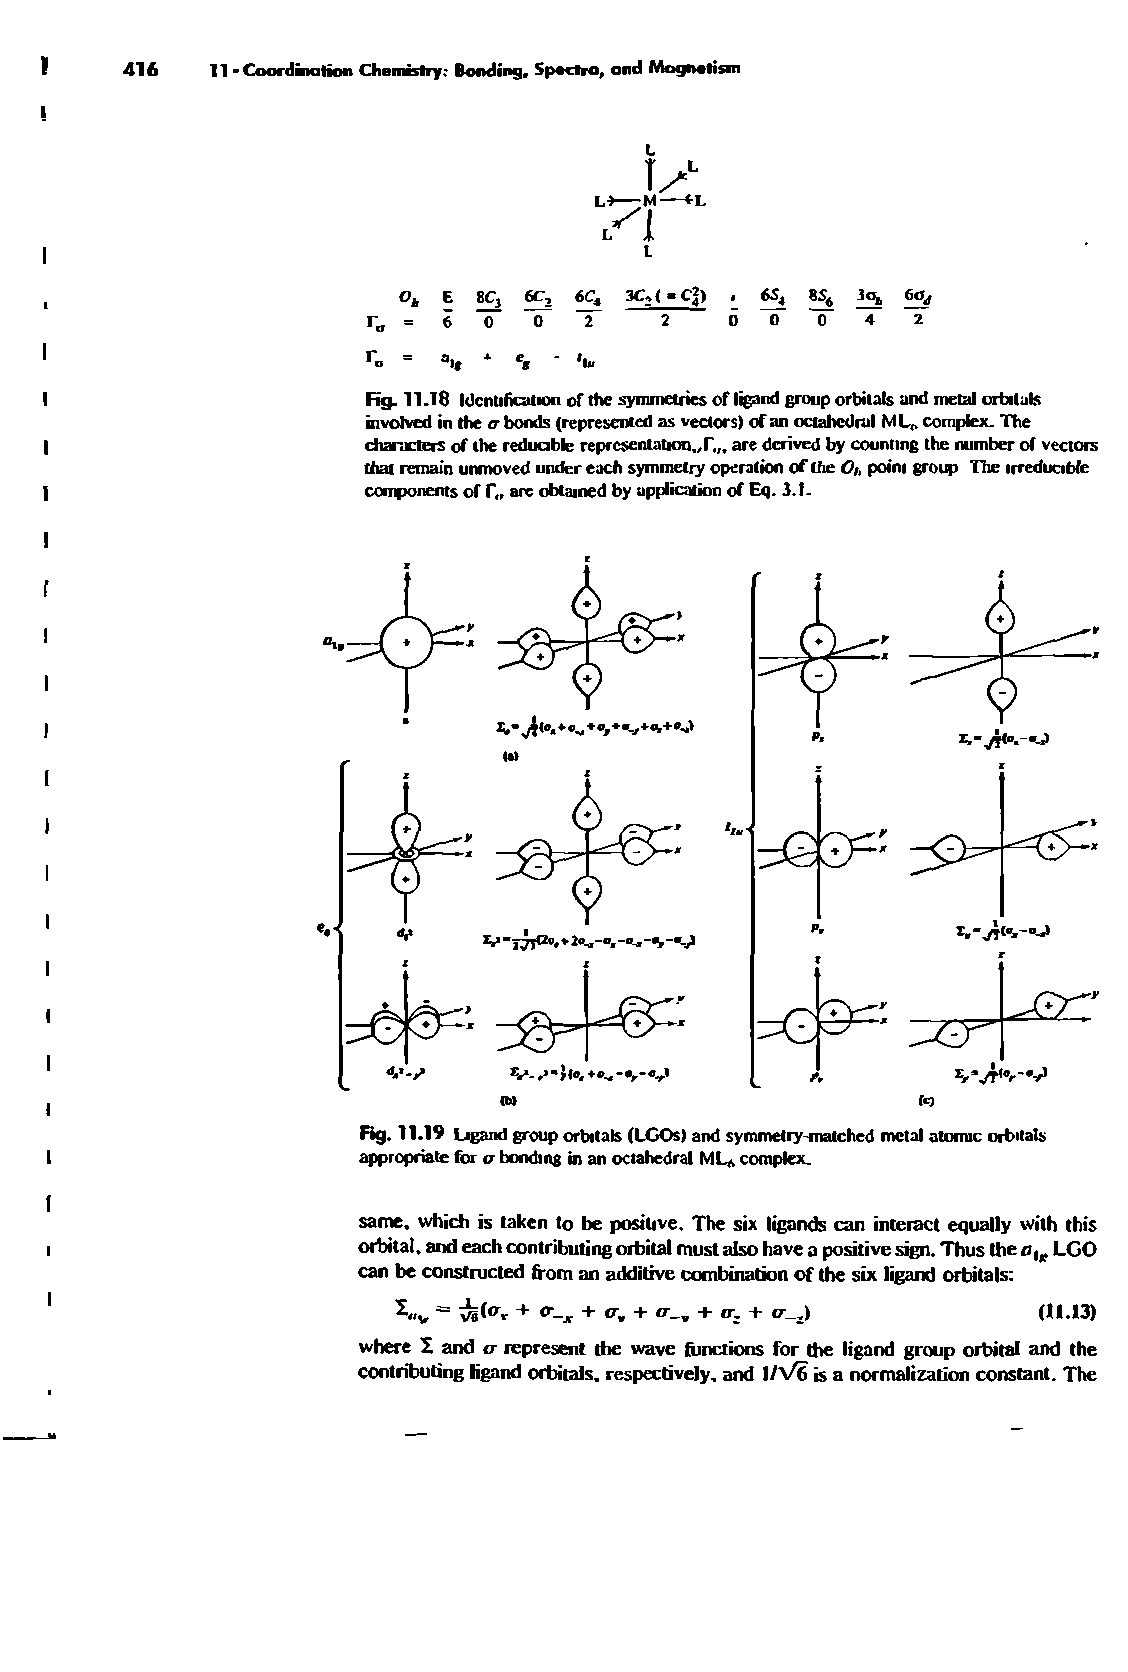 Fig. 11.18 Identification of the symmetries of ligand group orbitals and metal orbitals involved in the o bonds (represented as vectors) of an octahedral MU. complex. The characters of the reducible representation, r, are derived by counting the number of vectors that remain unmoved under each symmetry operation of the Oi, point group The irreducible components of C, are obtained by application of Eq. 3.1-...